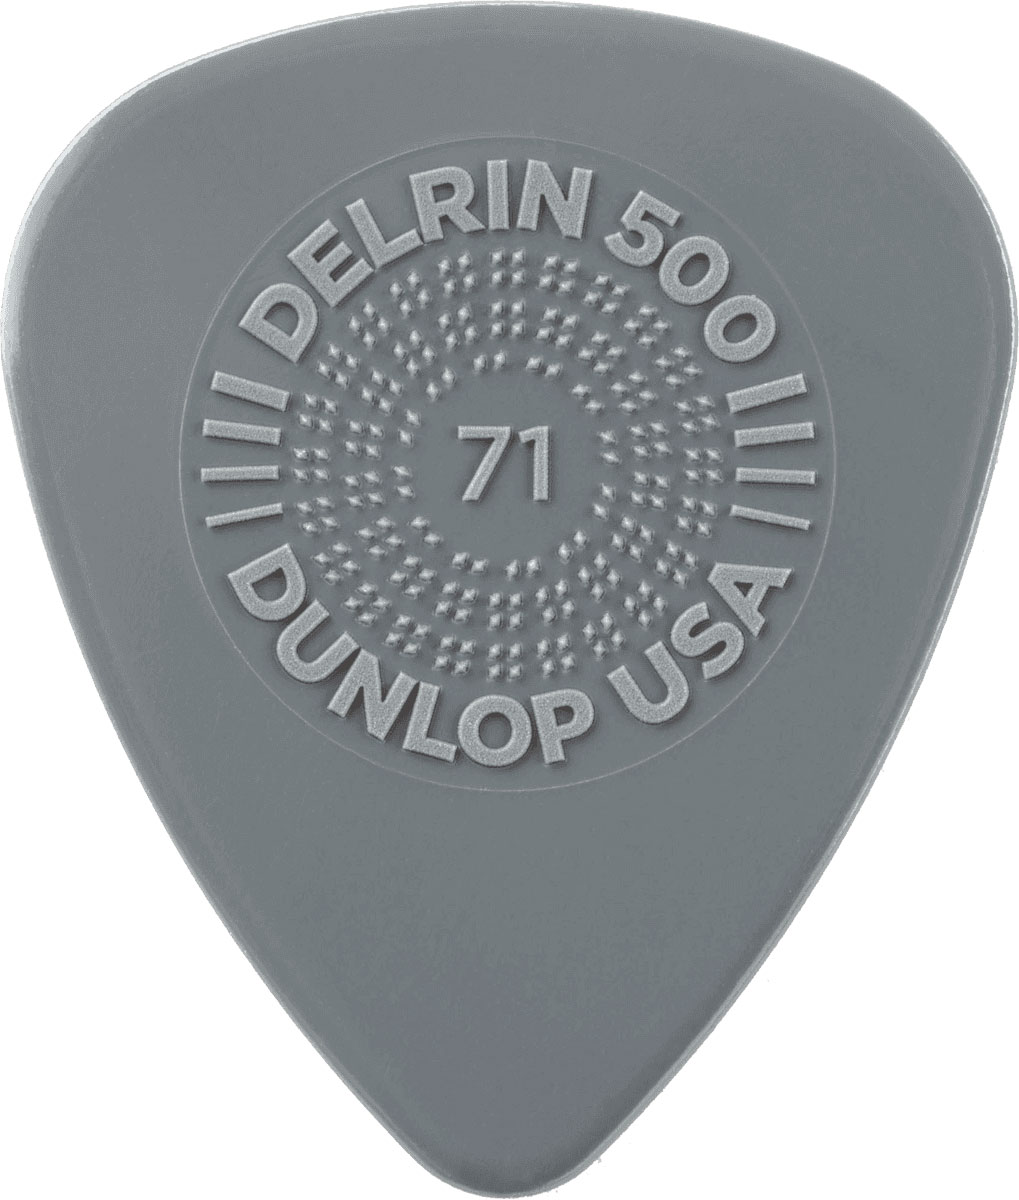 JIM DUNLOP SPECIALTY DELRIN 500 PRIME GRIP 0,71MM X 12